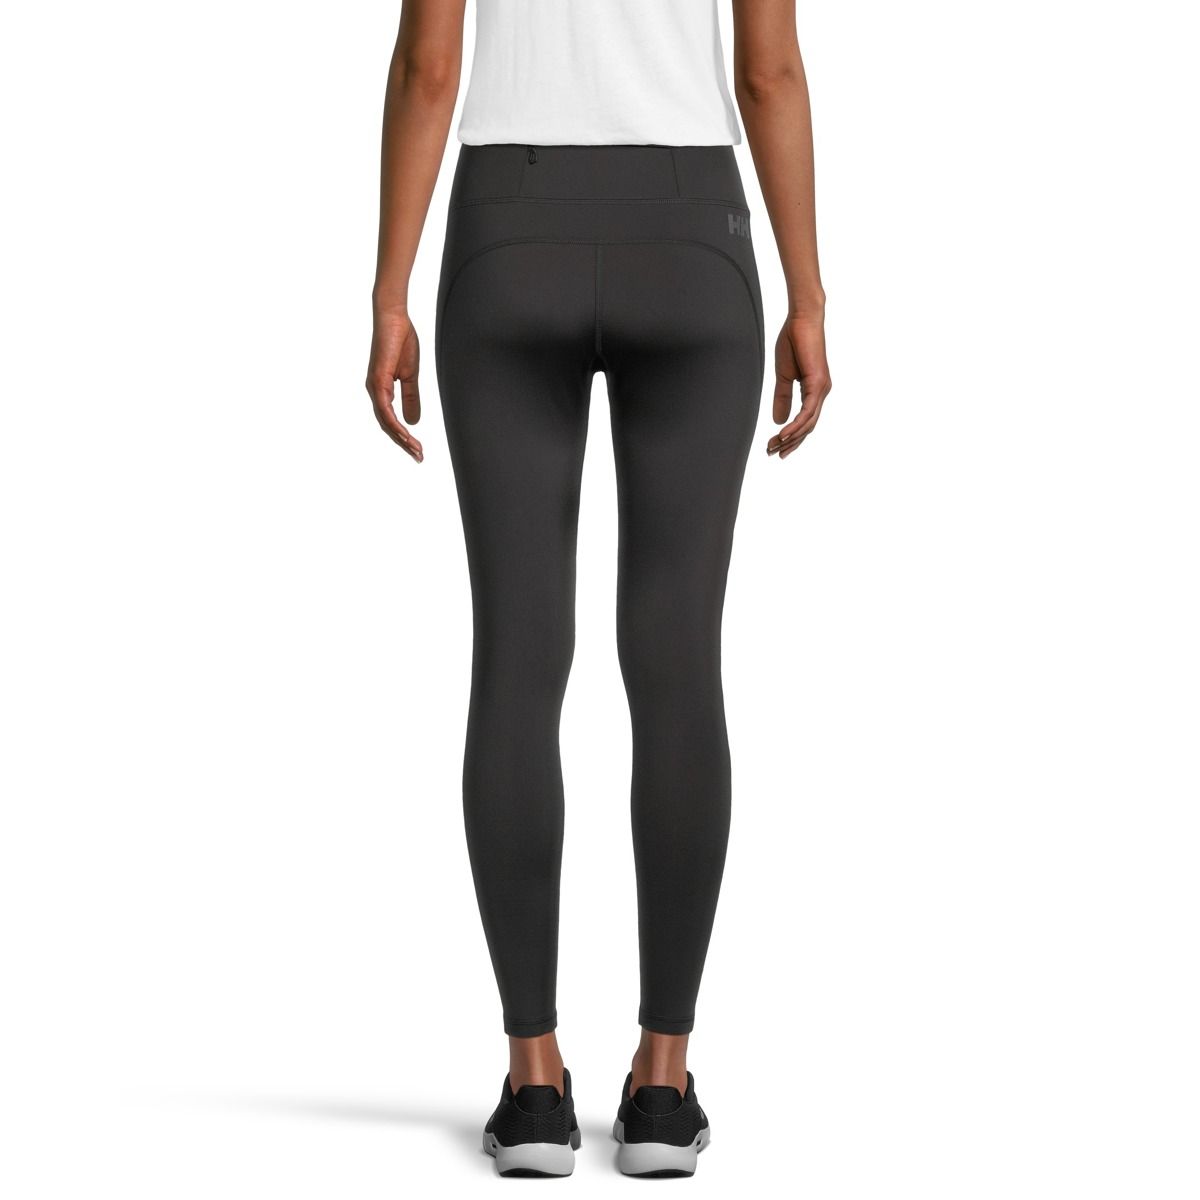 Lululemon x Team Canada Chase The Chill leggings will keep you warm when  running